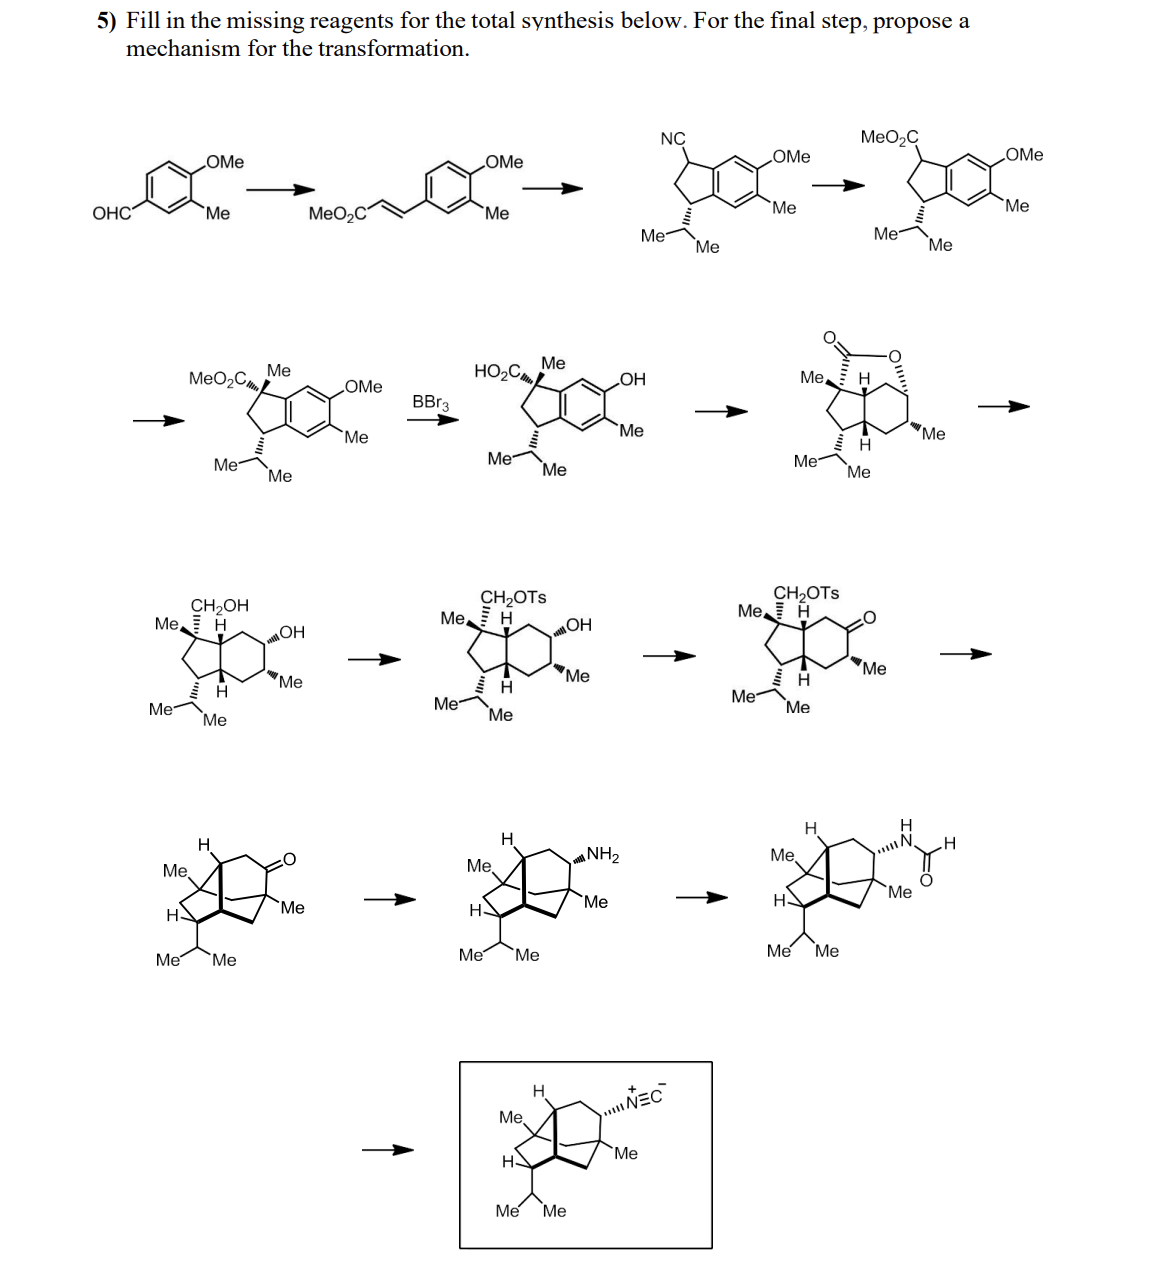 5) Fill in the missing reagents for the total synthesis below. For the final step, propose a
mechanism for the transformation.
NC
MeO₂C
OMe
OMe
OMe
OMe
Me
Me
OHC
Me
MeO2C
Me
Me
Me
Me
Me
Me
.OH
Me
-x-x--
Me
HO₂C
MeO2C
OMe
BBr3
Me
Me
Me
Me
Me
Me
H
Me
Me
Me
CH₂OH
Me H
OH
CH₂OTS
Me H
MOH
CH₂OTS
Me H
---
Me
H
Me
Me
Me
H
Me
Me
Me
H
Me
"Me
Me
H
Me
H
NH2
Me
H
* - * - Ø
H
Me
Me
Me
H
Me
Me
Me
H
Me
Me
Me
Me
H
H
Me Me
Me
H